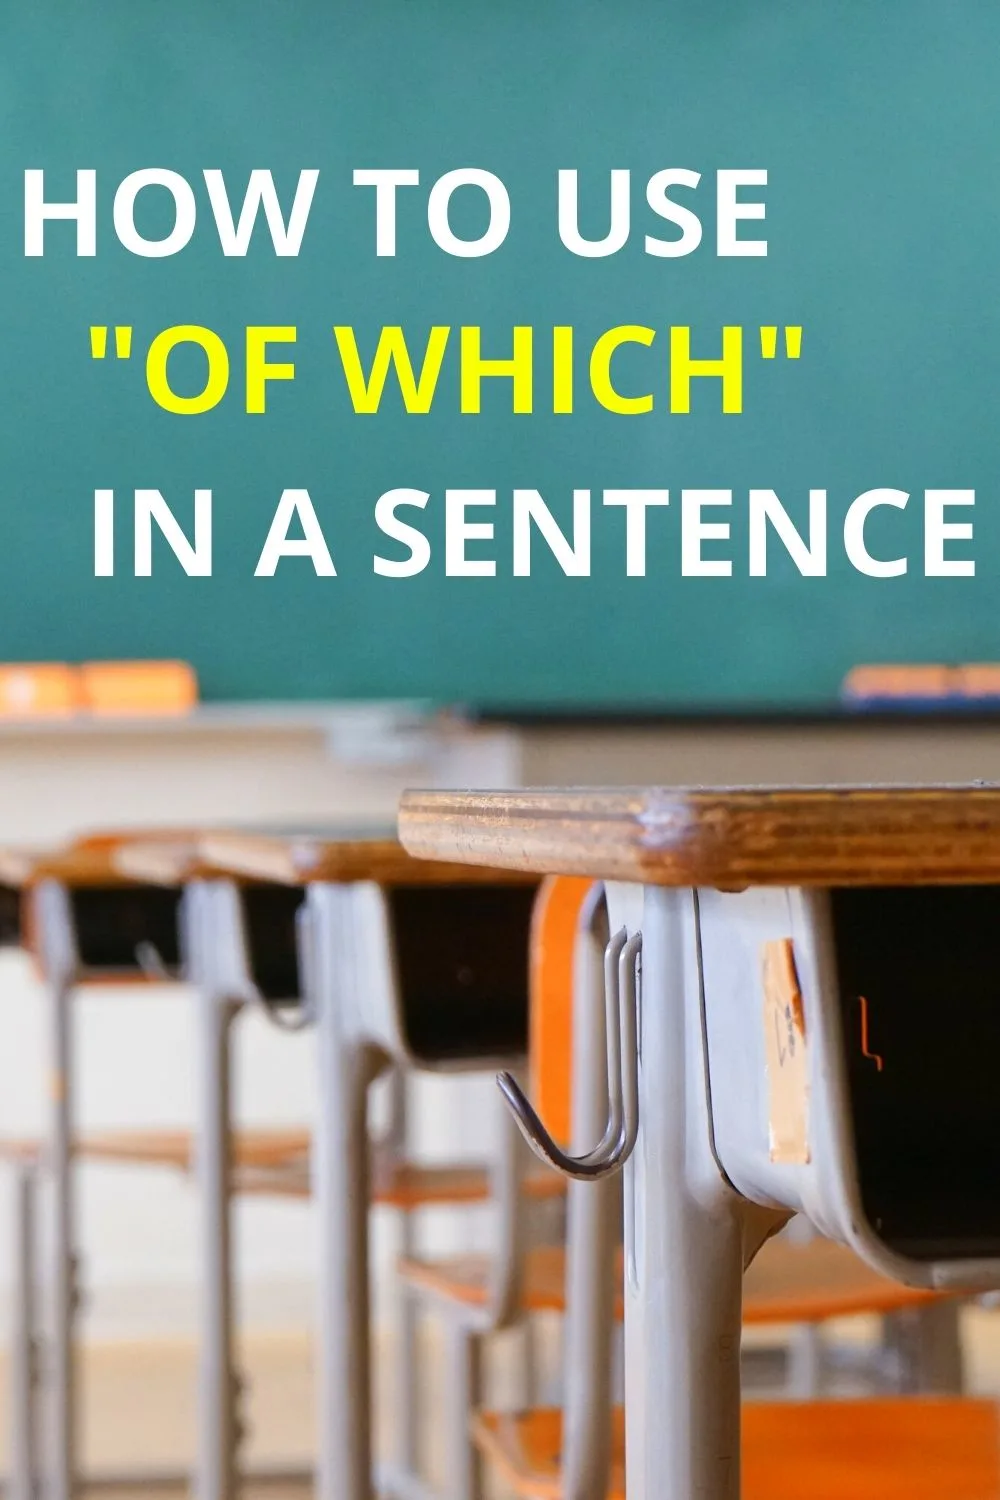 How to Use of which in a Sentence